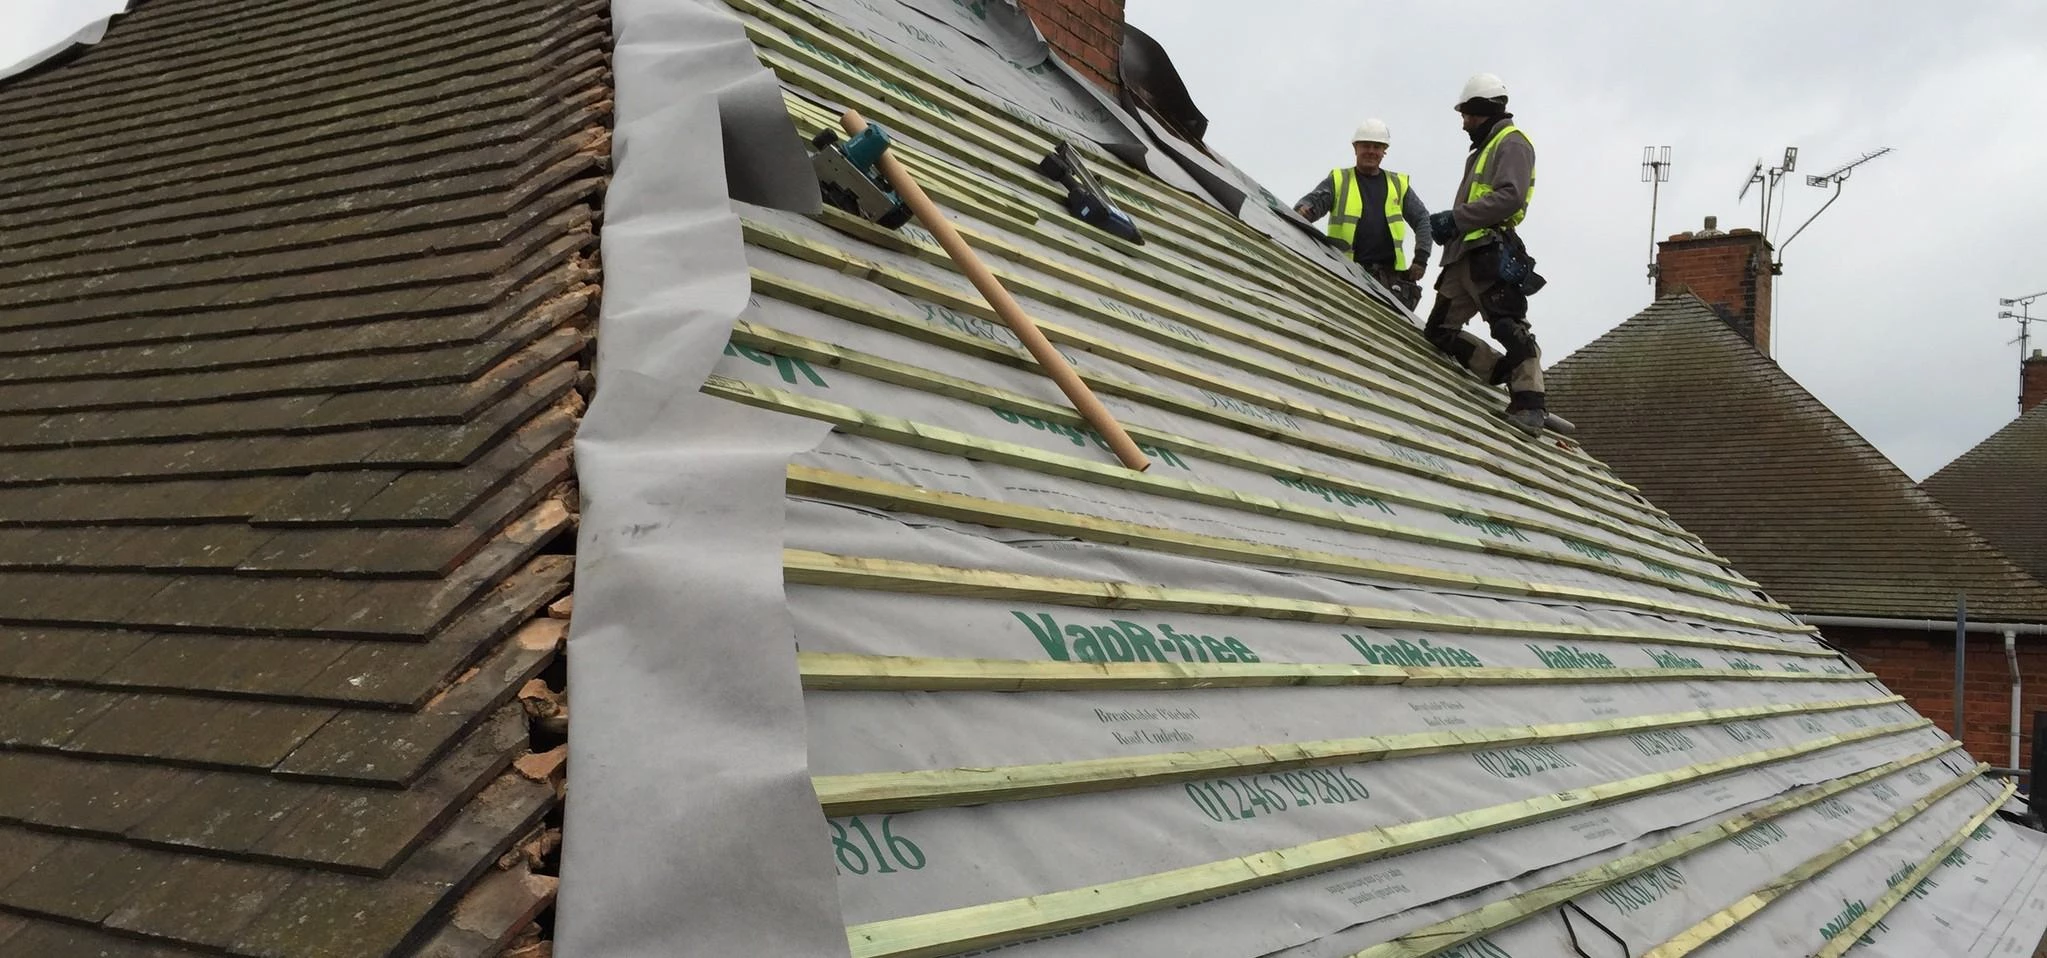 Martin-Brooks' roofing experts working on the Chesterfield Borough Council properties at Barrow Hill